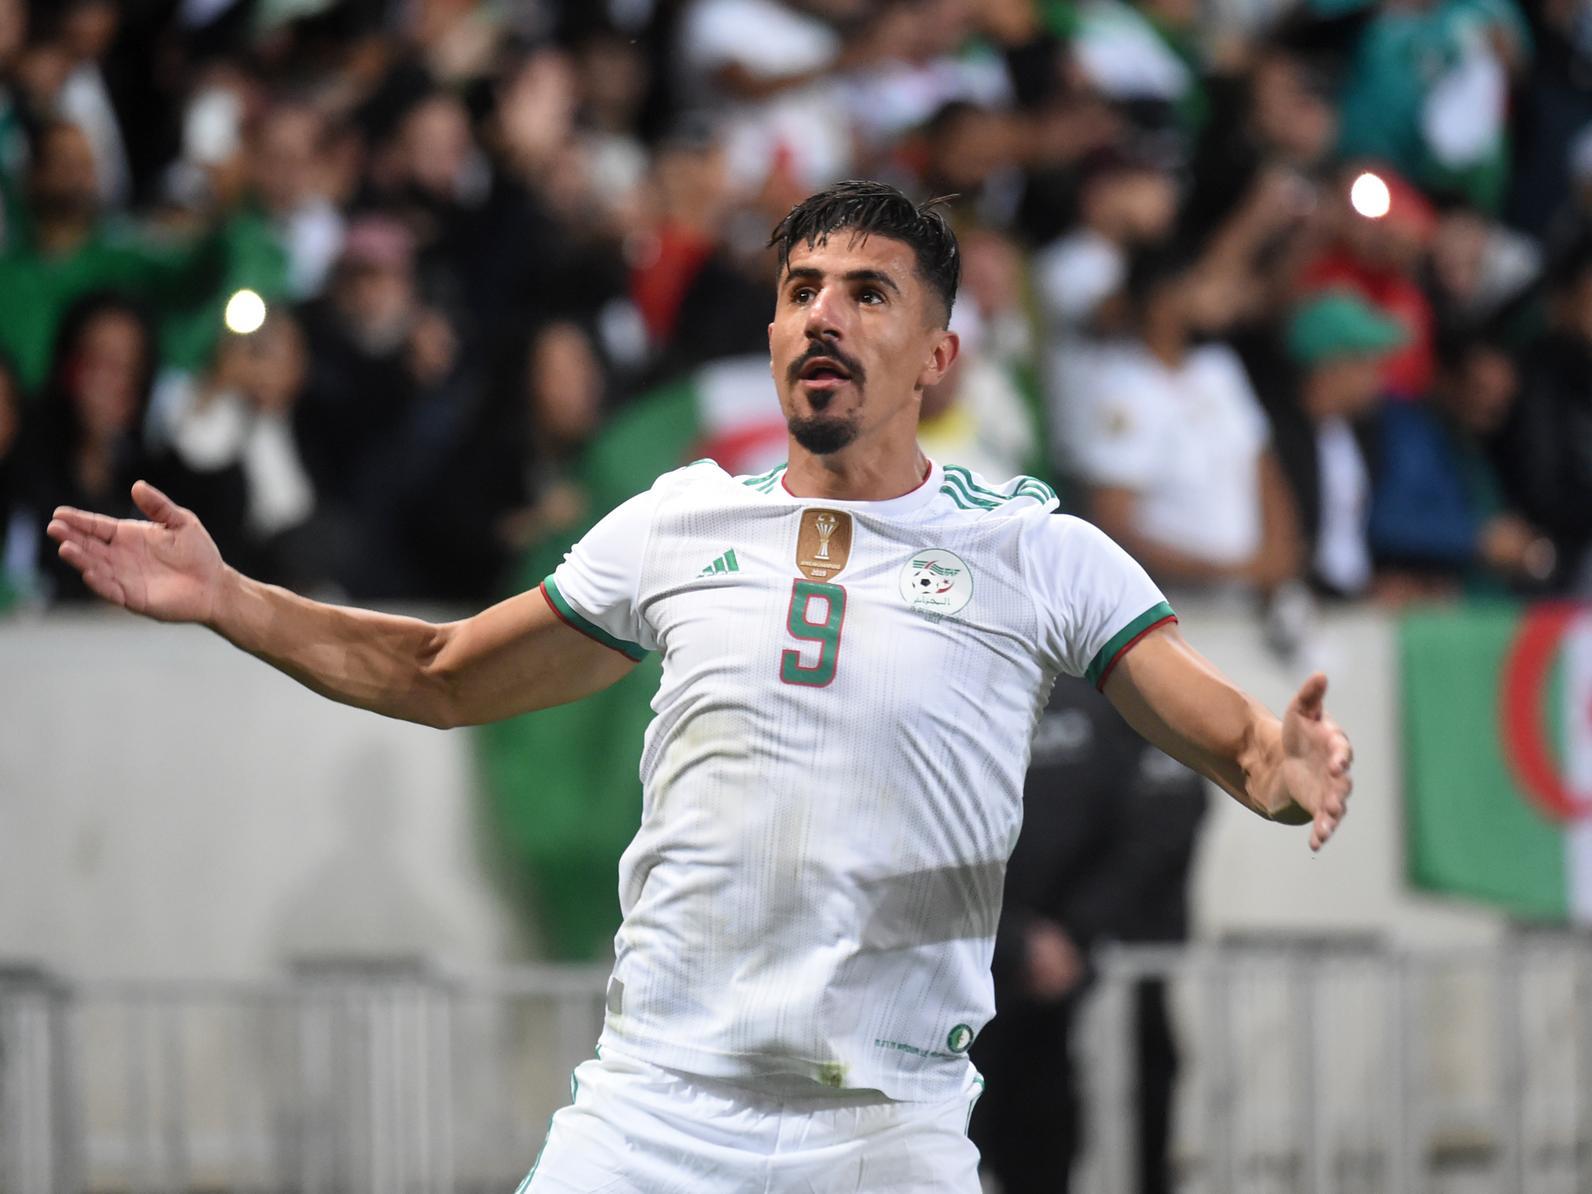 International reports suggest that Leeds are battling two of Marcelo Bielsa's side for Algeria striker Baghdad Bounedjah. Both Lille and Marseille are said to interested in the forward, who is said to be available for 6.5m. It remains to be seen whether Leeds are prepared to spend that much at this stage, particularly on a player unproven in Europe.